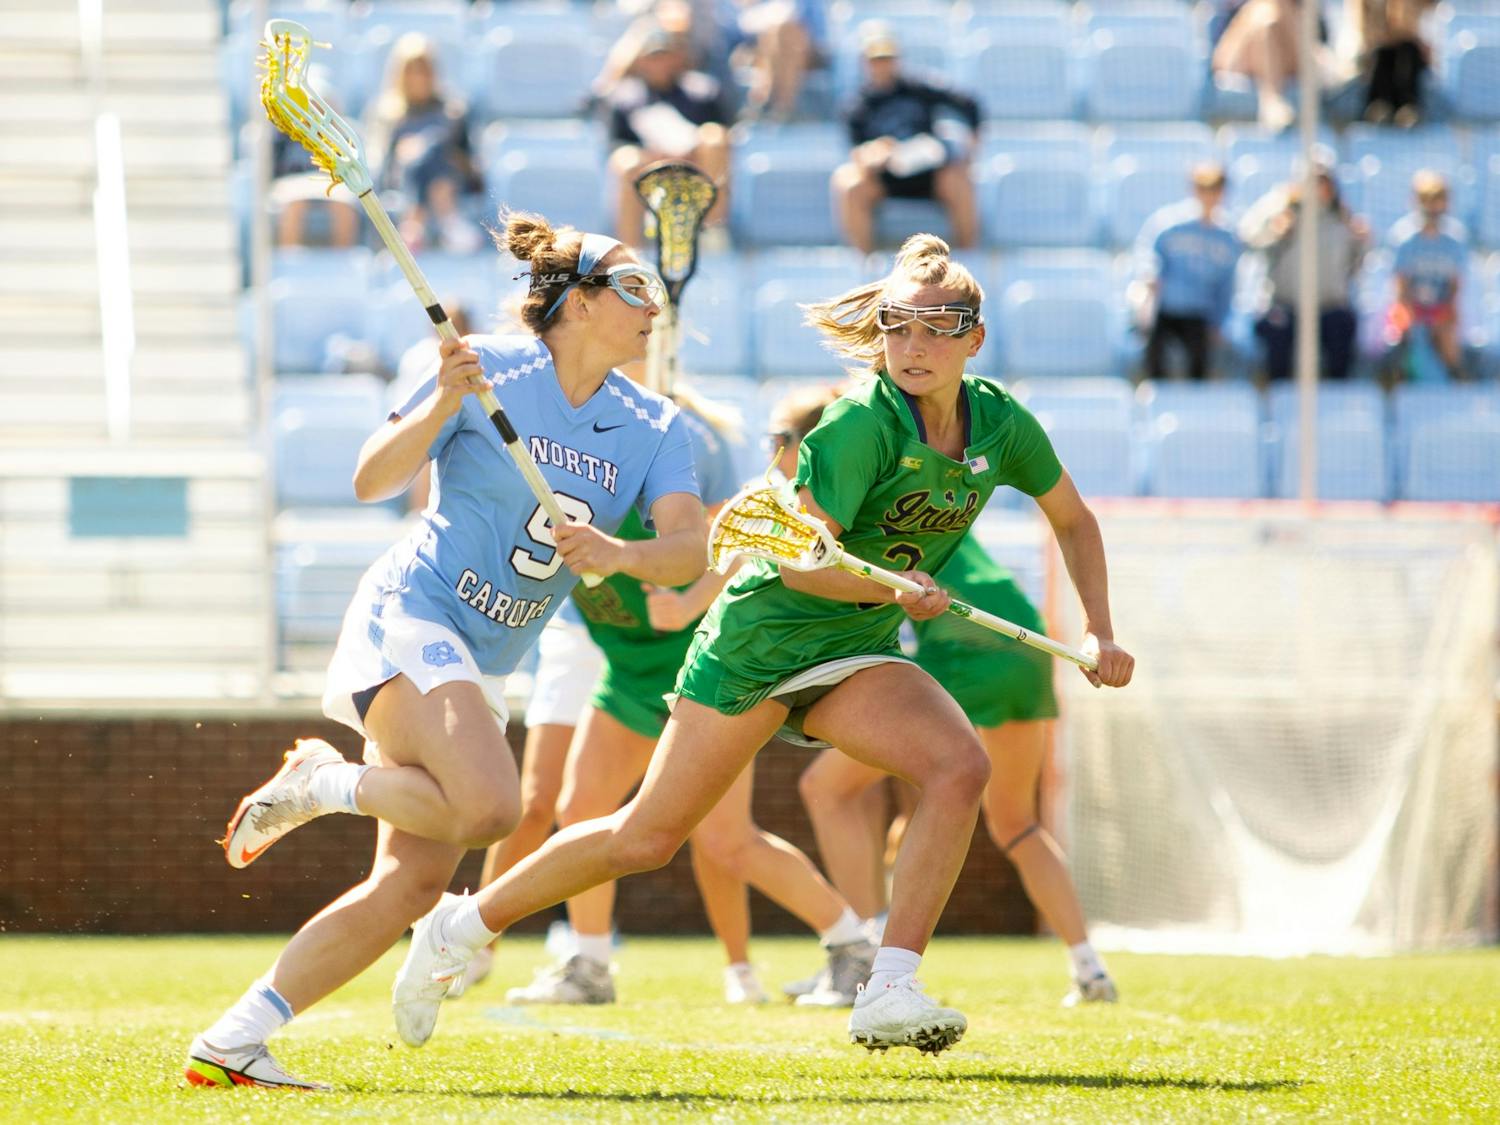 UNC junior midfielder Nicole Humphrey (9) runs the ball down the field during the women's lacrosse game against Notre Dame at Dorrance Field on Saturday, Apr. 2, 2022.